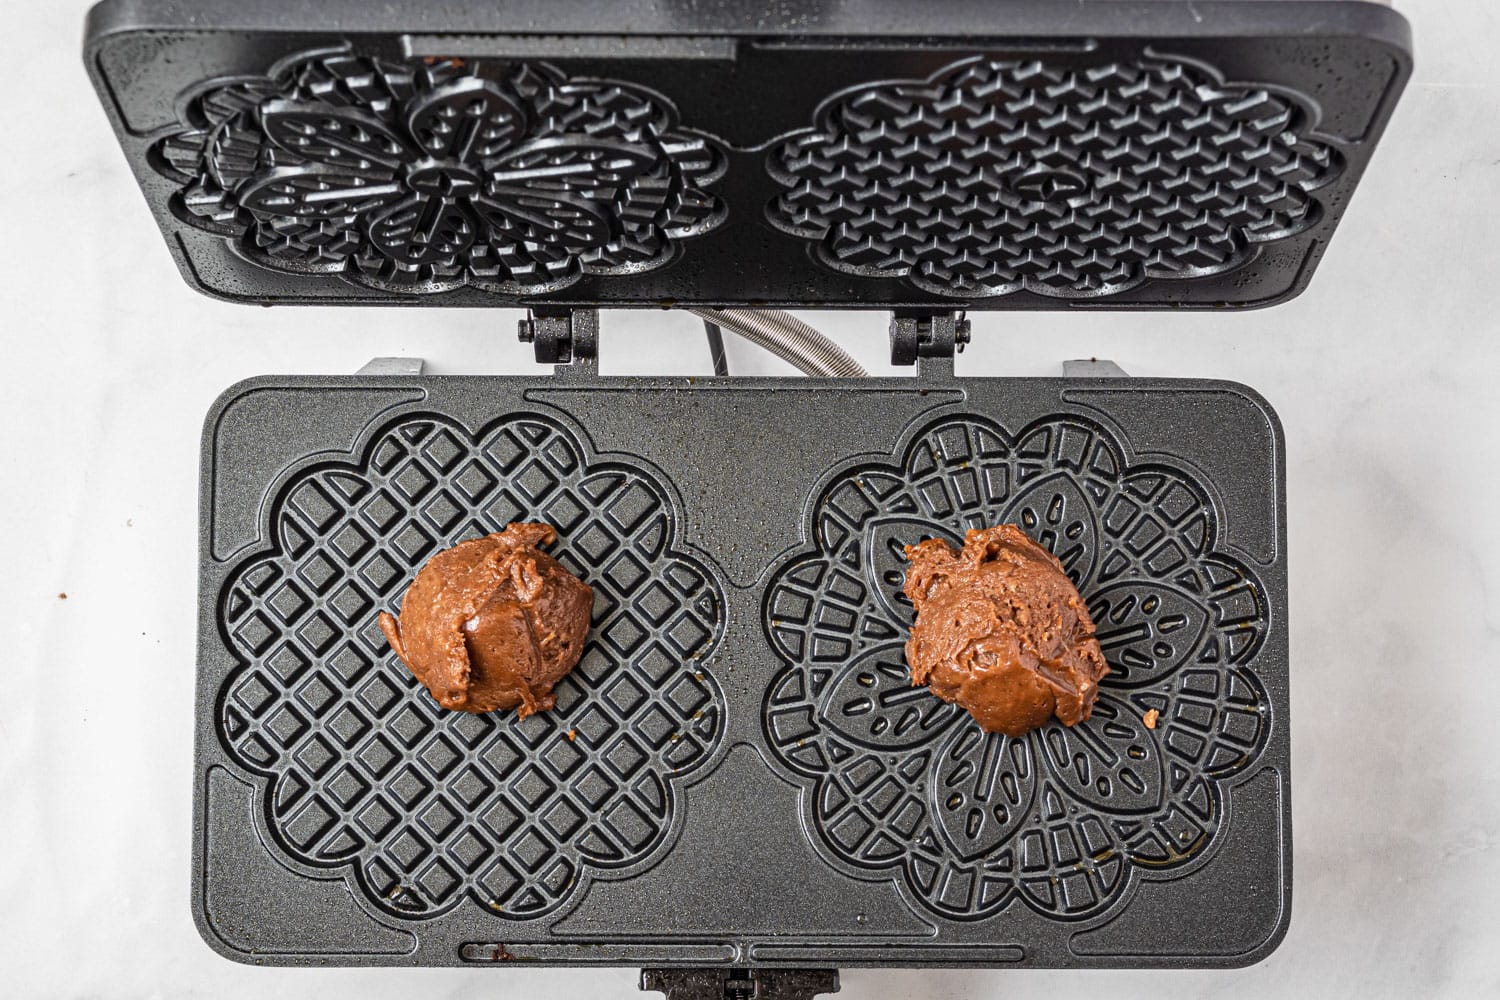 Chocolate pizzelle batter in a pizzelle iron